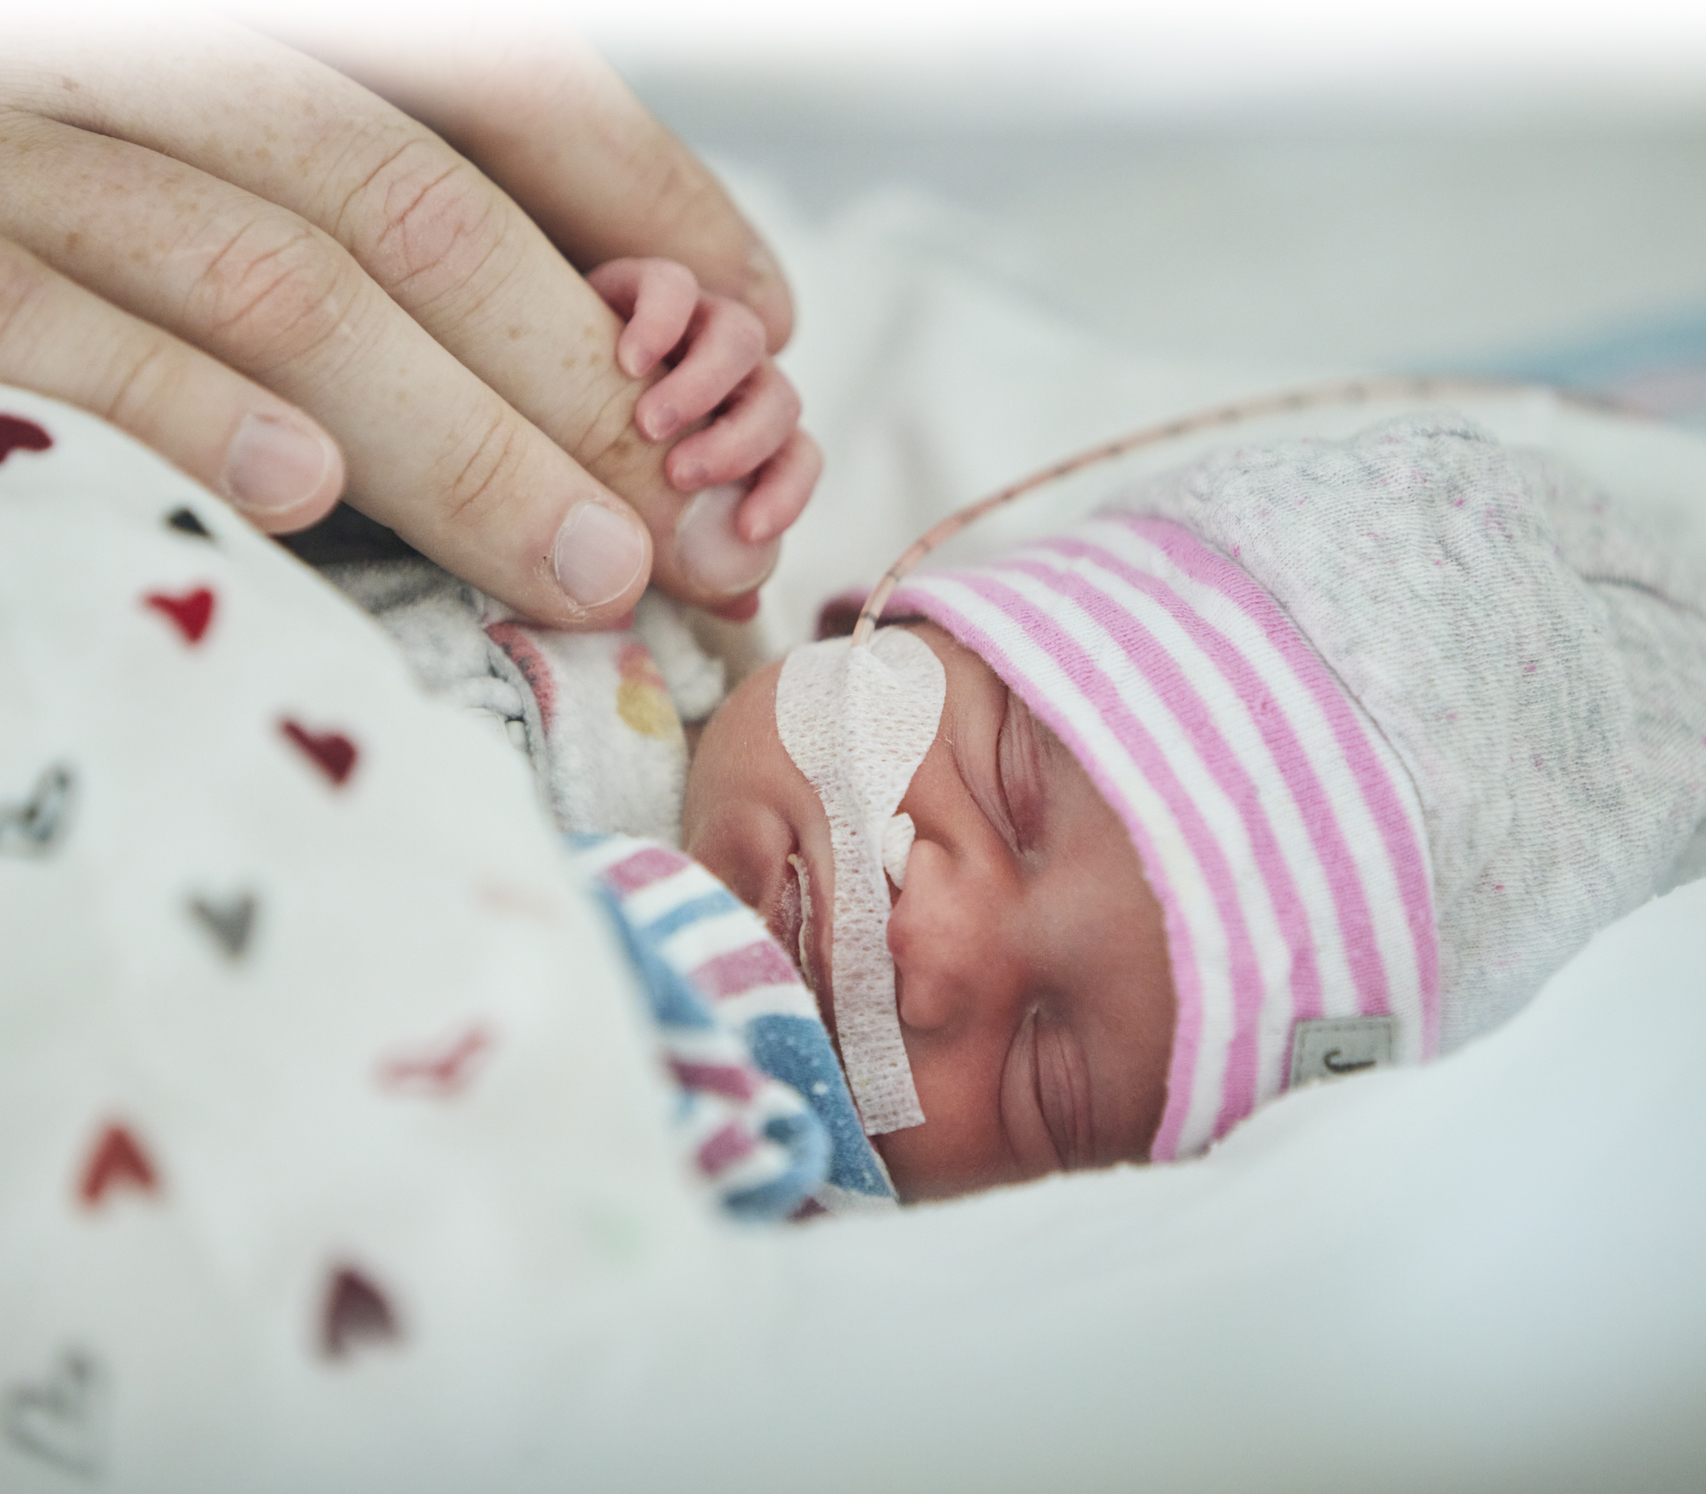 In the Sainte-Justine NICU, a sleeping Elyrose grasps her father’s finger with her tiny hand.